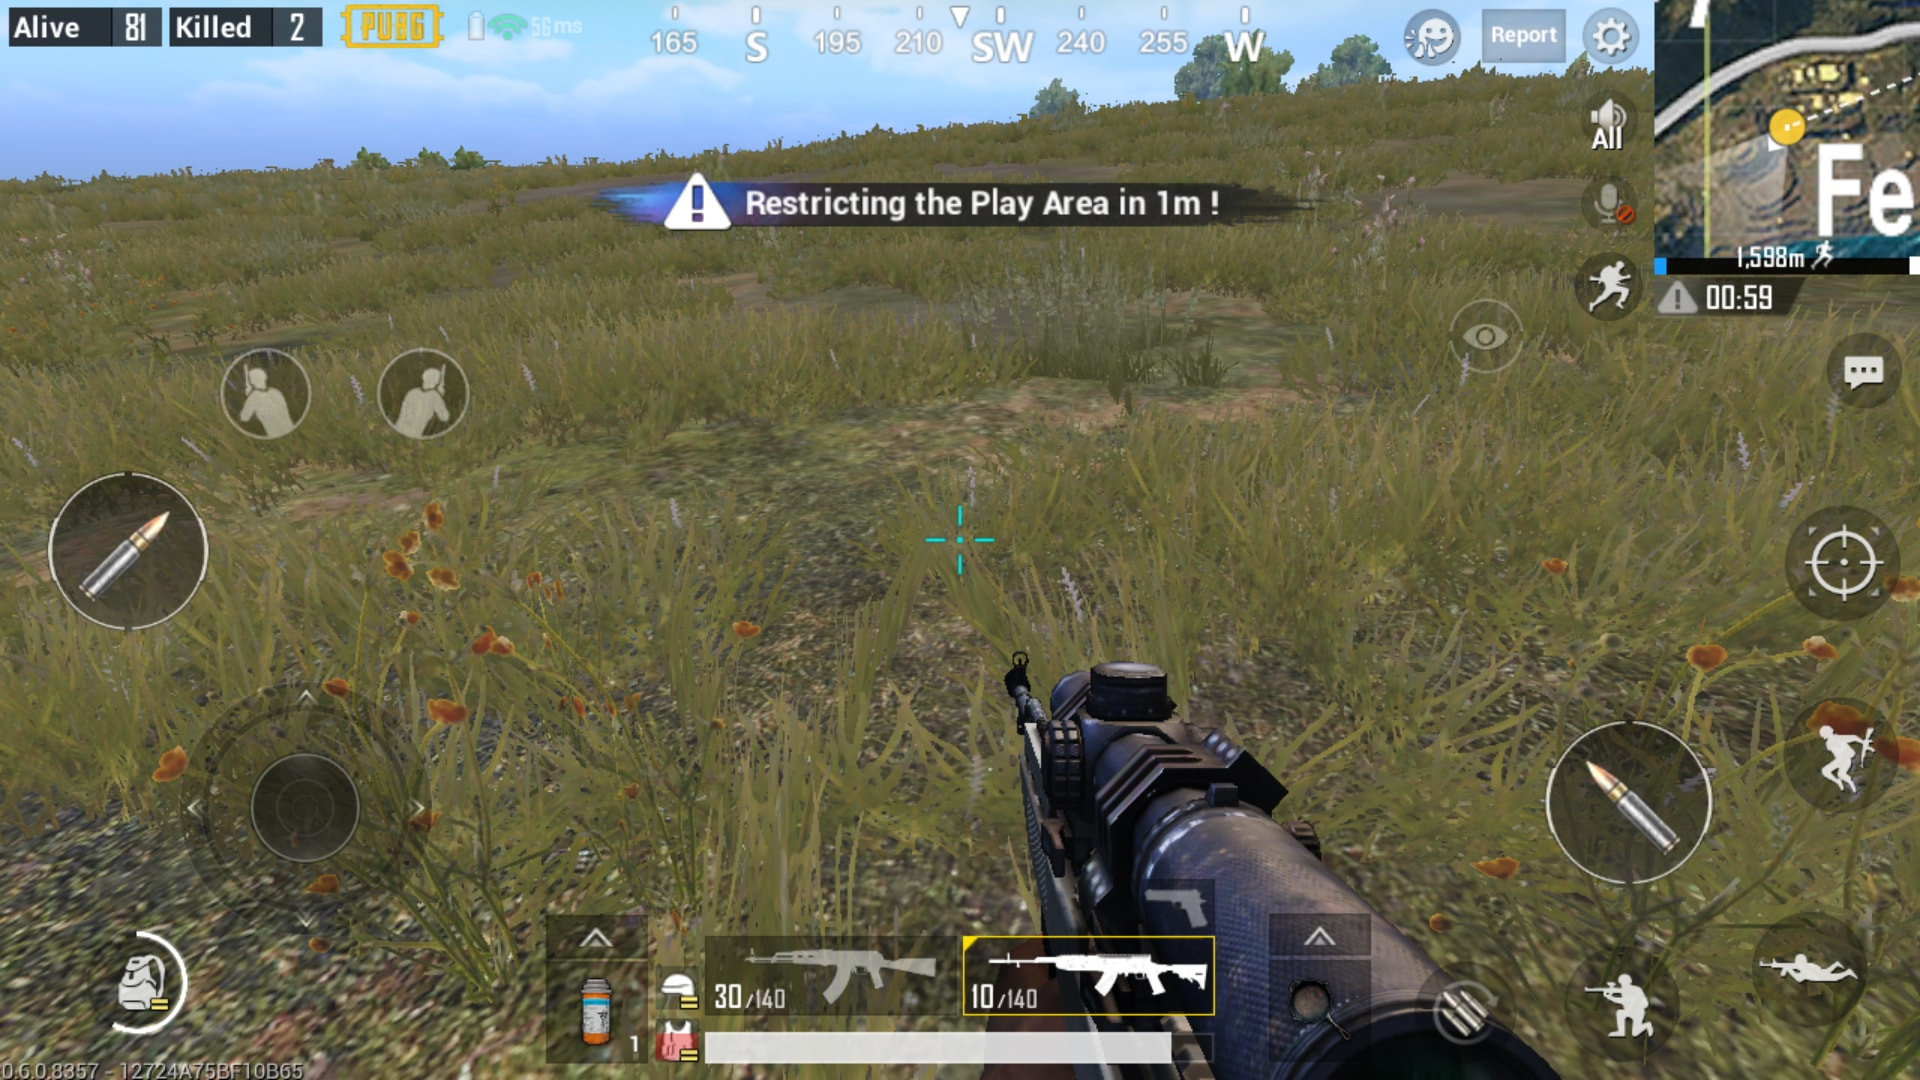 Sks in FPP Mode in PUBG MOBILE - zillliongamer your game guide